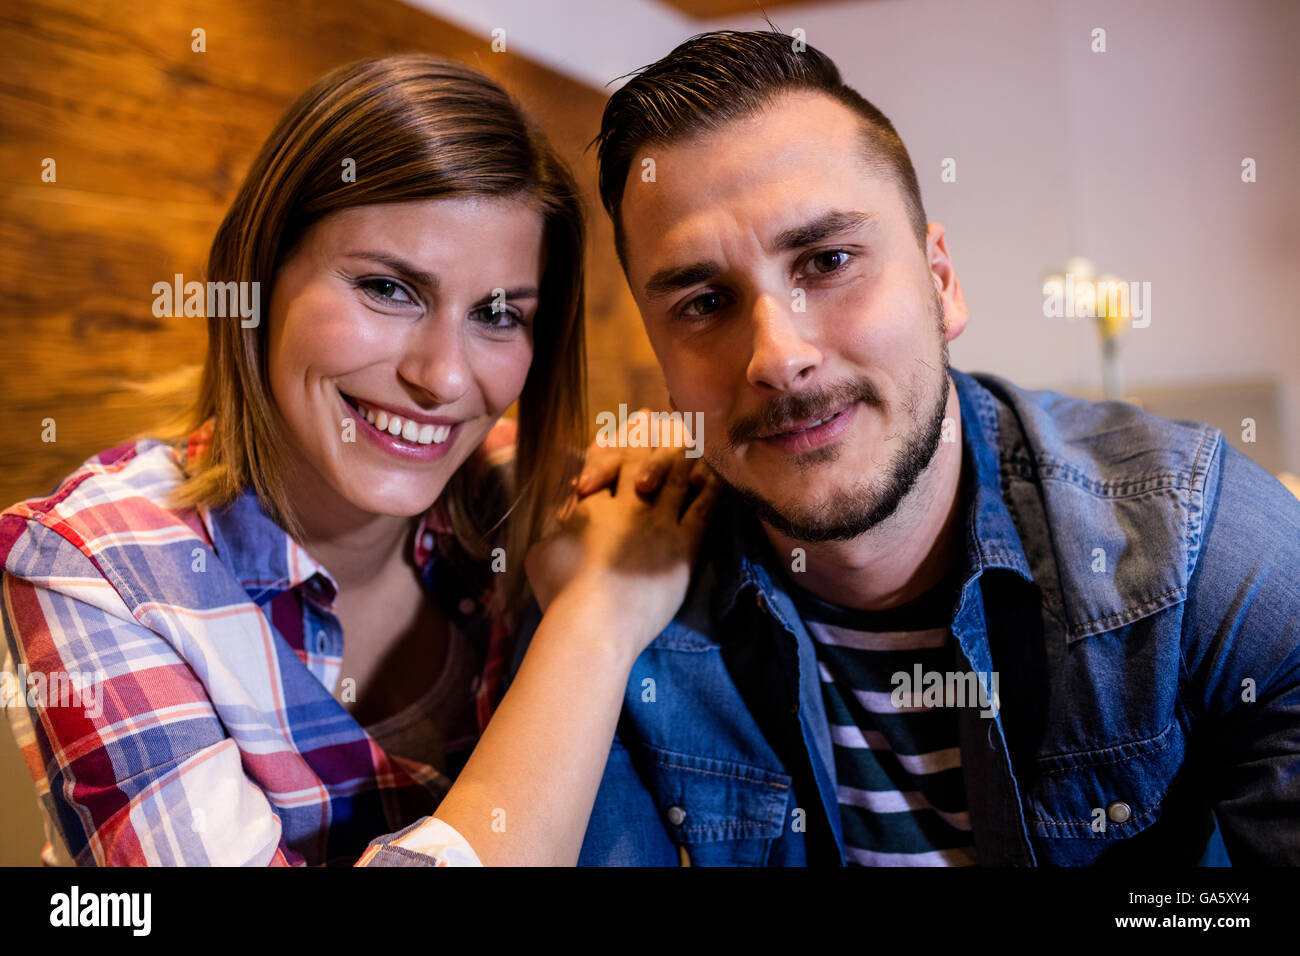 Portrait of happy couple at bar Stock Photo